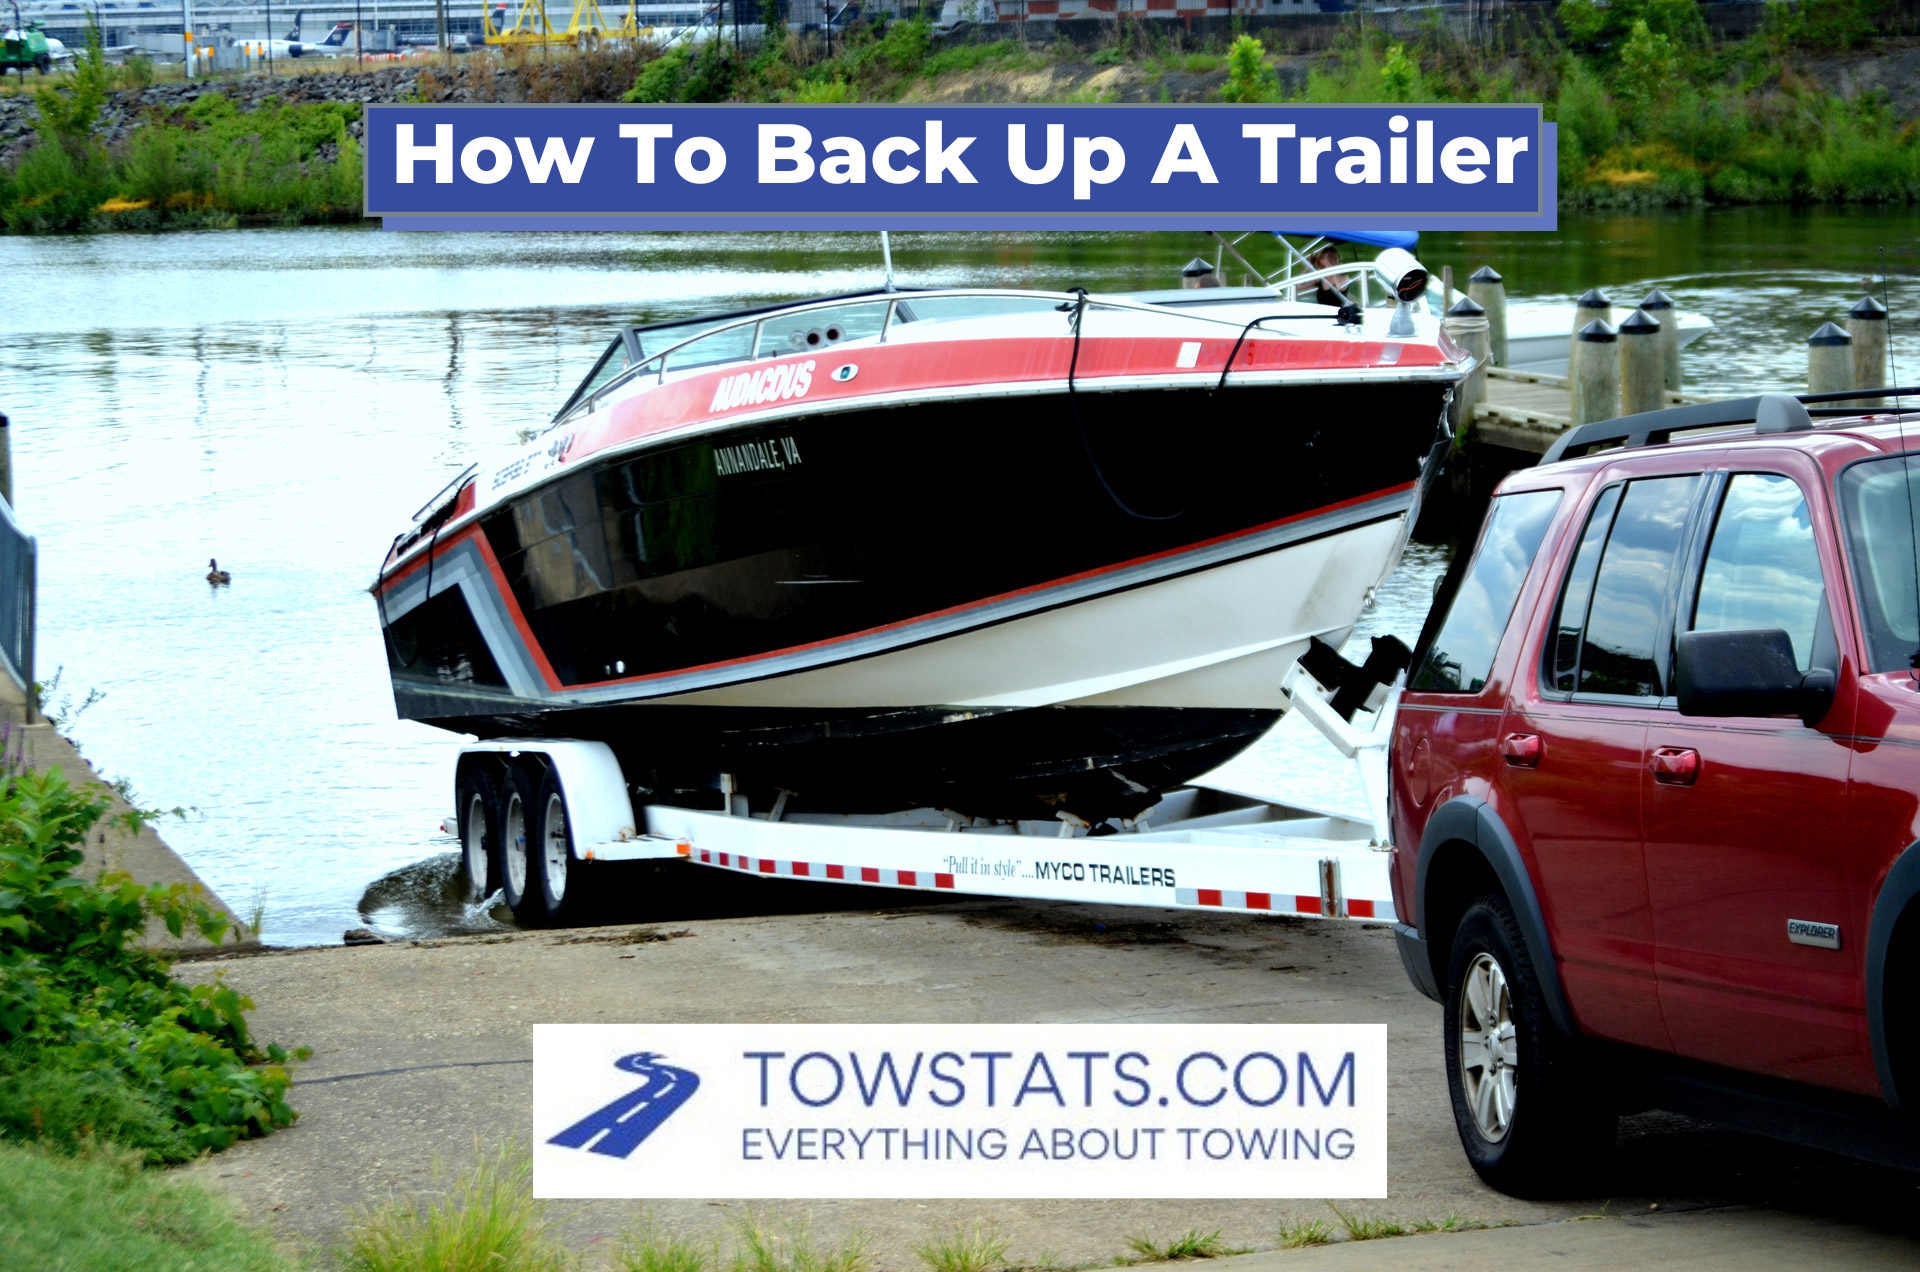 How To Back Up A Trailer